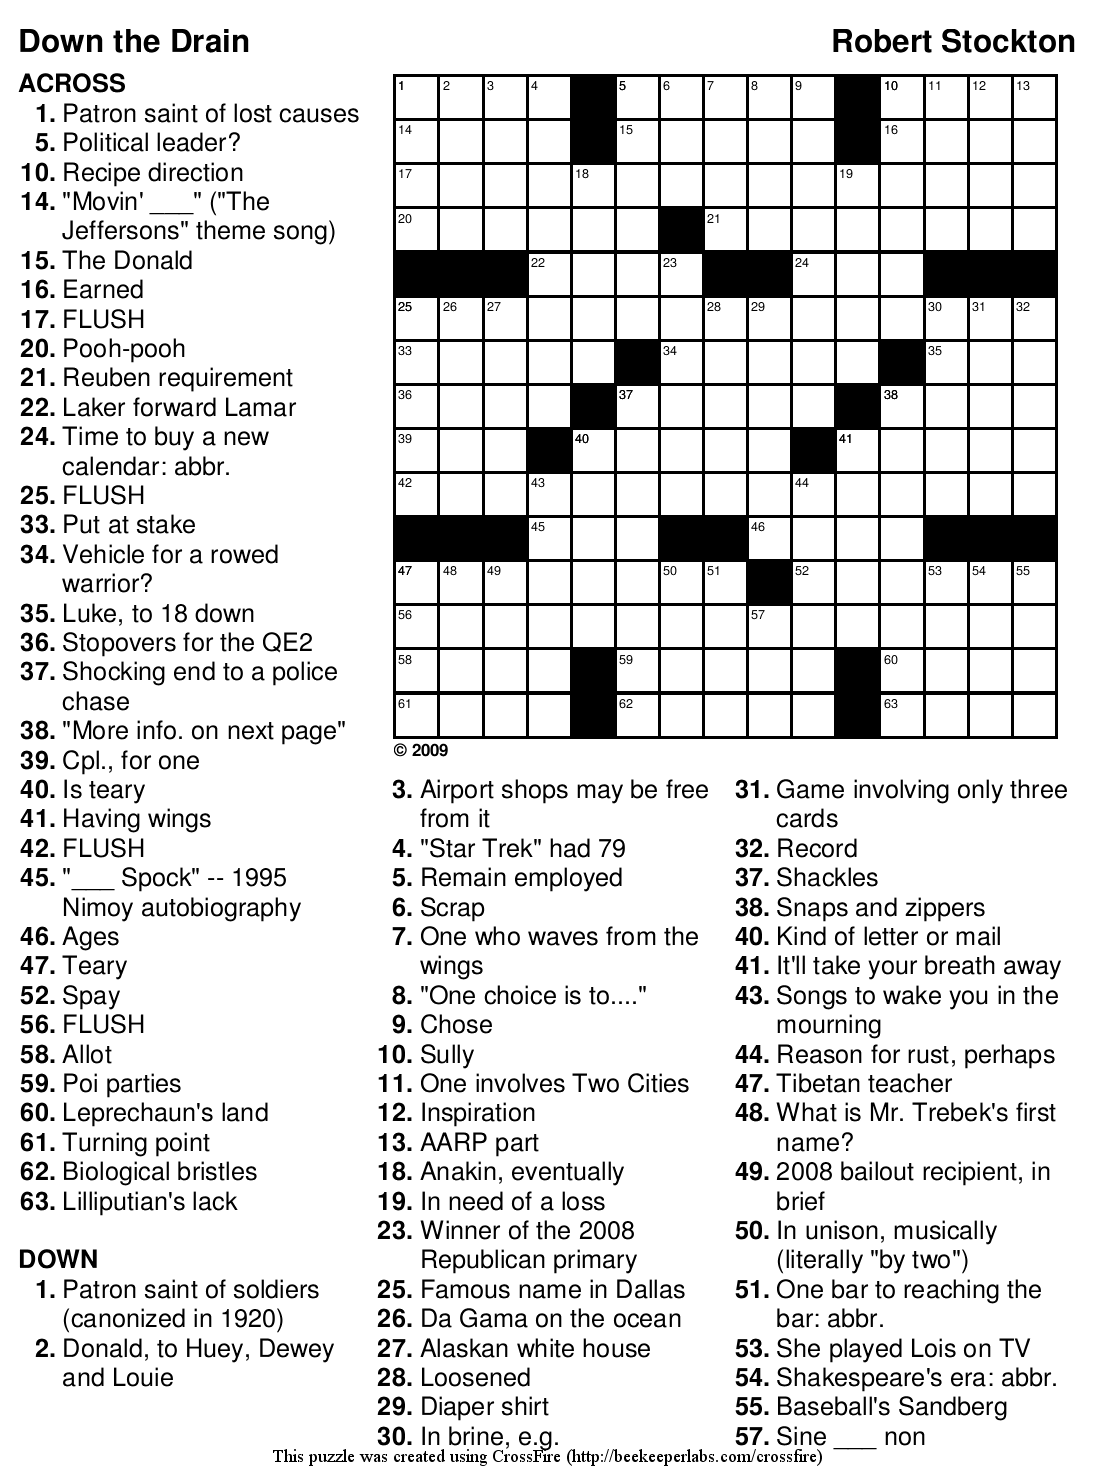 6-best-images-of-easy-adult-crossword-puzzles-printable-printable-adult-crossword-puzzles